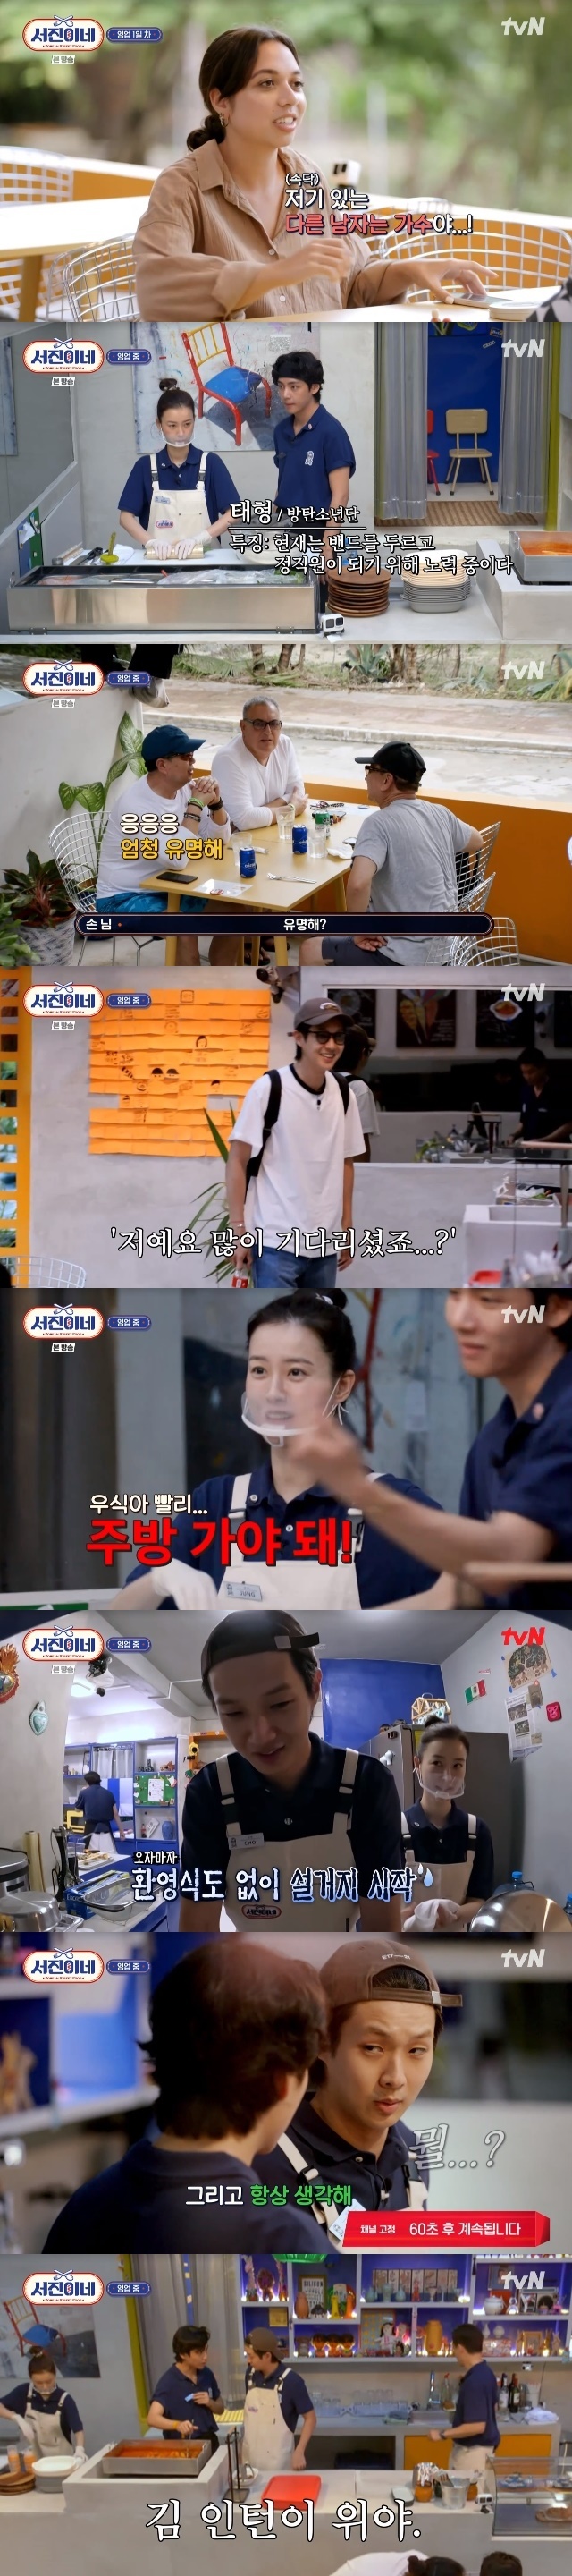 With more and more customers recognizing BTS V, Choi Woo-shik was trapped in washing dishes jade as soon as he joined.On March 3, TVN performing arts Seo-jin!In the second session, Lee Seo-jin, who was promoted to president from Yoon Restaurant, and Jung Yu-mi, Park Seo-joon, Choi Woo-shik and BTS V continued to operate the restaurant in Bacalar, Mexico.Lee Seo-jin, who returned to his hotel after closing his business at 6:50 pm, said, The menu is too difficult. You know Koreas famous foods. This is too unfamiliar.I went to see the menu only. As a result of the staff meeting, I decided to add spicy spicy gimbap and potato hot dog as a new menu.The next day, on a Saturday, the staff opened at two oclock, and as soon as the store opened, customers began to arrive.First of all, three uncles who seem to be familiar with Korea, such as asking if there is soju, waited for the menu they ordered and talked about The Intern V, saying, That man is a singer. He is very famous.It was not the first time that these customers recognized V. On the first day of sales, the male and female customers who visited the store also said, The other man there is a singer. What group was it?It was the moment when the true face of Worldstein V was revealed.On the other hand, Jung Yu-mi fell into a ment bang in the crowded guests.Three guests came in, but Gimbap orders only six lines, and Jung Yu-mi became more anxious because he mistook the number of Gimbap that he had to go out because the order was ambiguous.Park Seo-joon, who was at The Kitchen in the back, came out for a while and said, Slow down sister.Jung Yu-mis mental care was handled, saying, Its better than making a mistake in a hurry. Jung Yu-mi moved his hand urgently, saying, Im waiting too long.A mistake was made in the process: Jung Yu-mi simultaneously challenged the end of two Gimbap lines to shorten the time, but one Gimbap line burst into irreversible levels.Still, Jung Yu-mi cleared the orders that came in step by step, and the guests liked the Gimbap taste as fresh and delicious.In the meantime, V developed a new sauce for Gimbap. Last night, I asked employees who were worried about spicy sauce recipes, Do you want to add roasted chicken sauce?V, who first proposed it, made a sauce with mayonnaise and sugar to neutralize the spicy taste of the roast chicken sauce.The finished fireball sauce was plattered directly into the hands of V, and the Mexican guests did not bother to eat it.After a lull, the shop became busy again. Even when a group of five people entered the store, Lee Seo-jin broke down for a while.The Intern V. The shop, which took the chairs of the guests on behalf of the boss, took care of the washing dishes hell while taking care of it.However, there was not enough manpower to take orders for endless guests. At this time, Choi Woo-shik just arrived.Choi Woo-shik, who came to the store with a lot of guests, said, I do not think there are many guests. Choi Woo-shik was surprised by the unexpected boom, and Lee Seo-jin, who discovered Choi Woo-shik, and his staff, I have to go to The Kitchen soon, and I wash dishes.Choi Woo-shik, who arrived on the plane for 16 hours and 4-5 hours, laughed at the washing dishes without a time to put on his buttocks and without a welcome ceremony.Choi Woo-shik, who was washing dishes, told Park Seo-joon, V, who talked about Doran Doran in alienation, Both of you are cute with a hair band?Choi Woo-shik, who showed a smile of joy when Park Seo-joon replied, I have yours, said, Do you think youre getting a little bit like you did not see it?It showed a strange sense of distance.